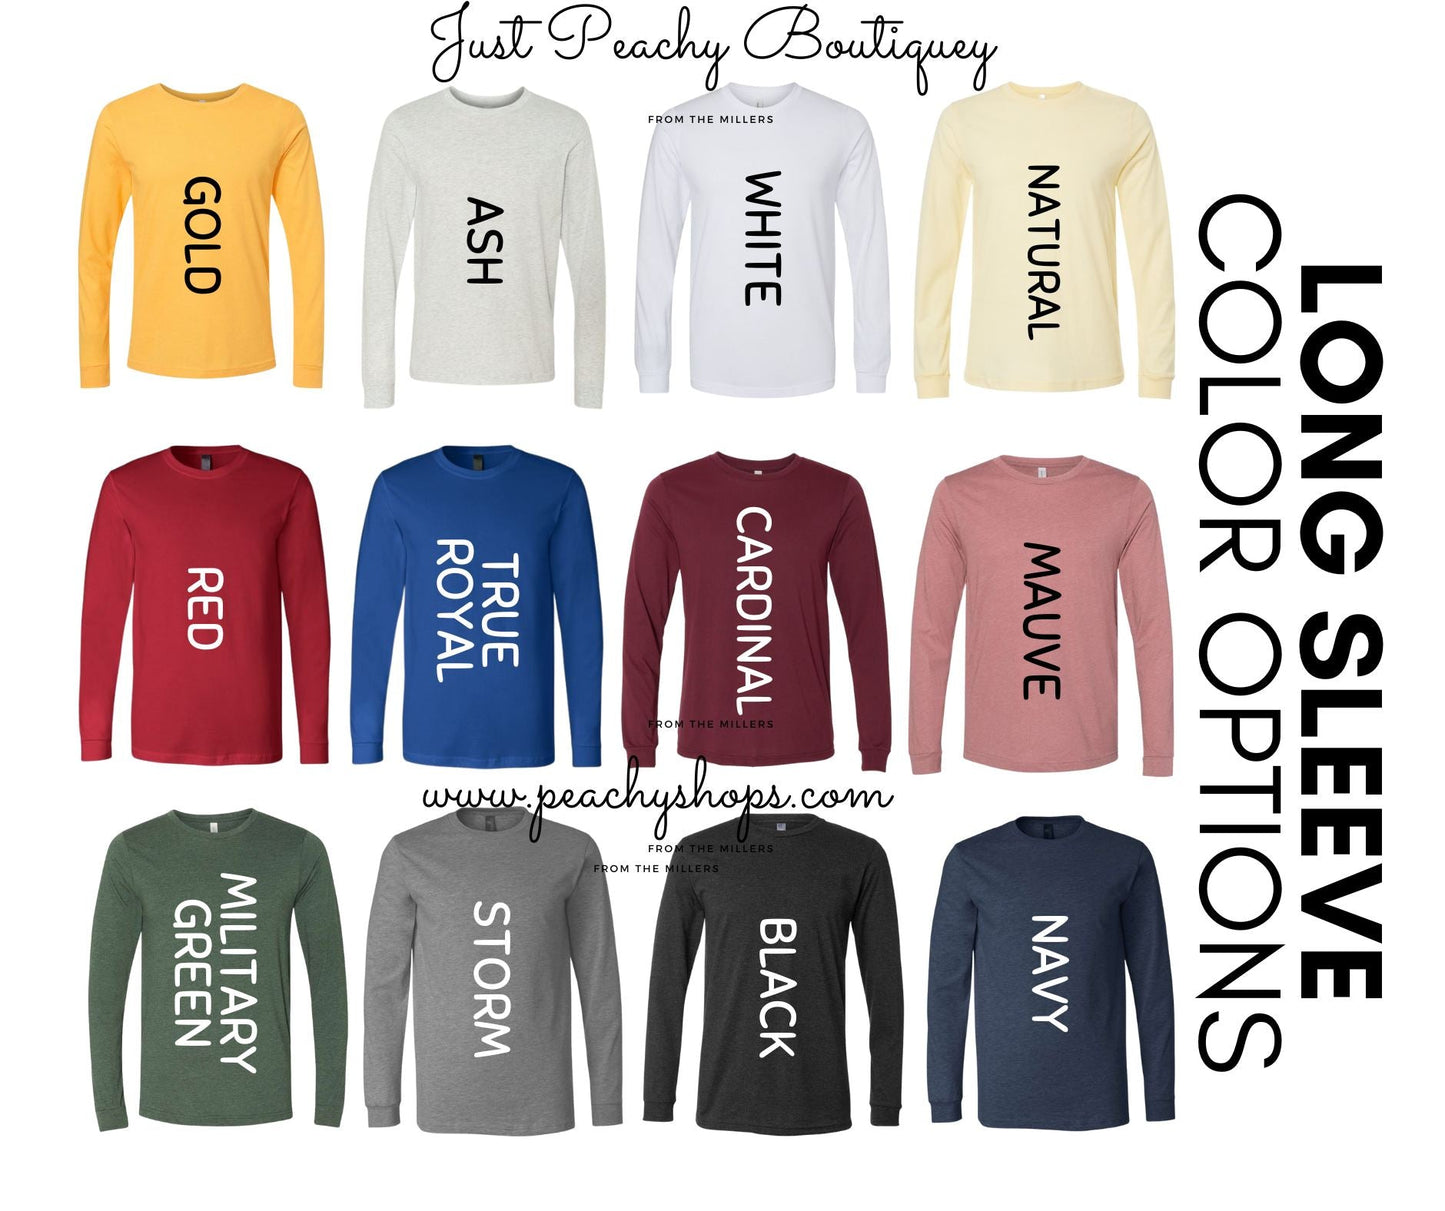 HARVARD LAW (JUST KIDDING)  T-SHIRT OR PICK FROM 200 COLOR & STYLE OPTIONS! - TAT 4-7 DAYS